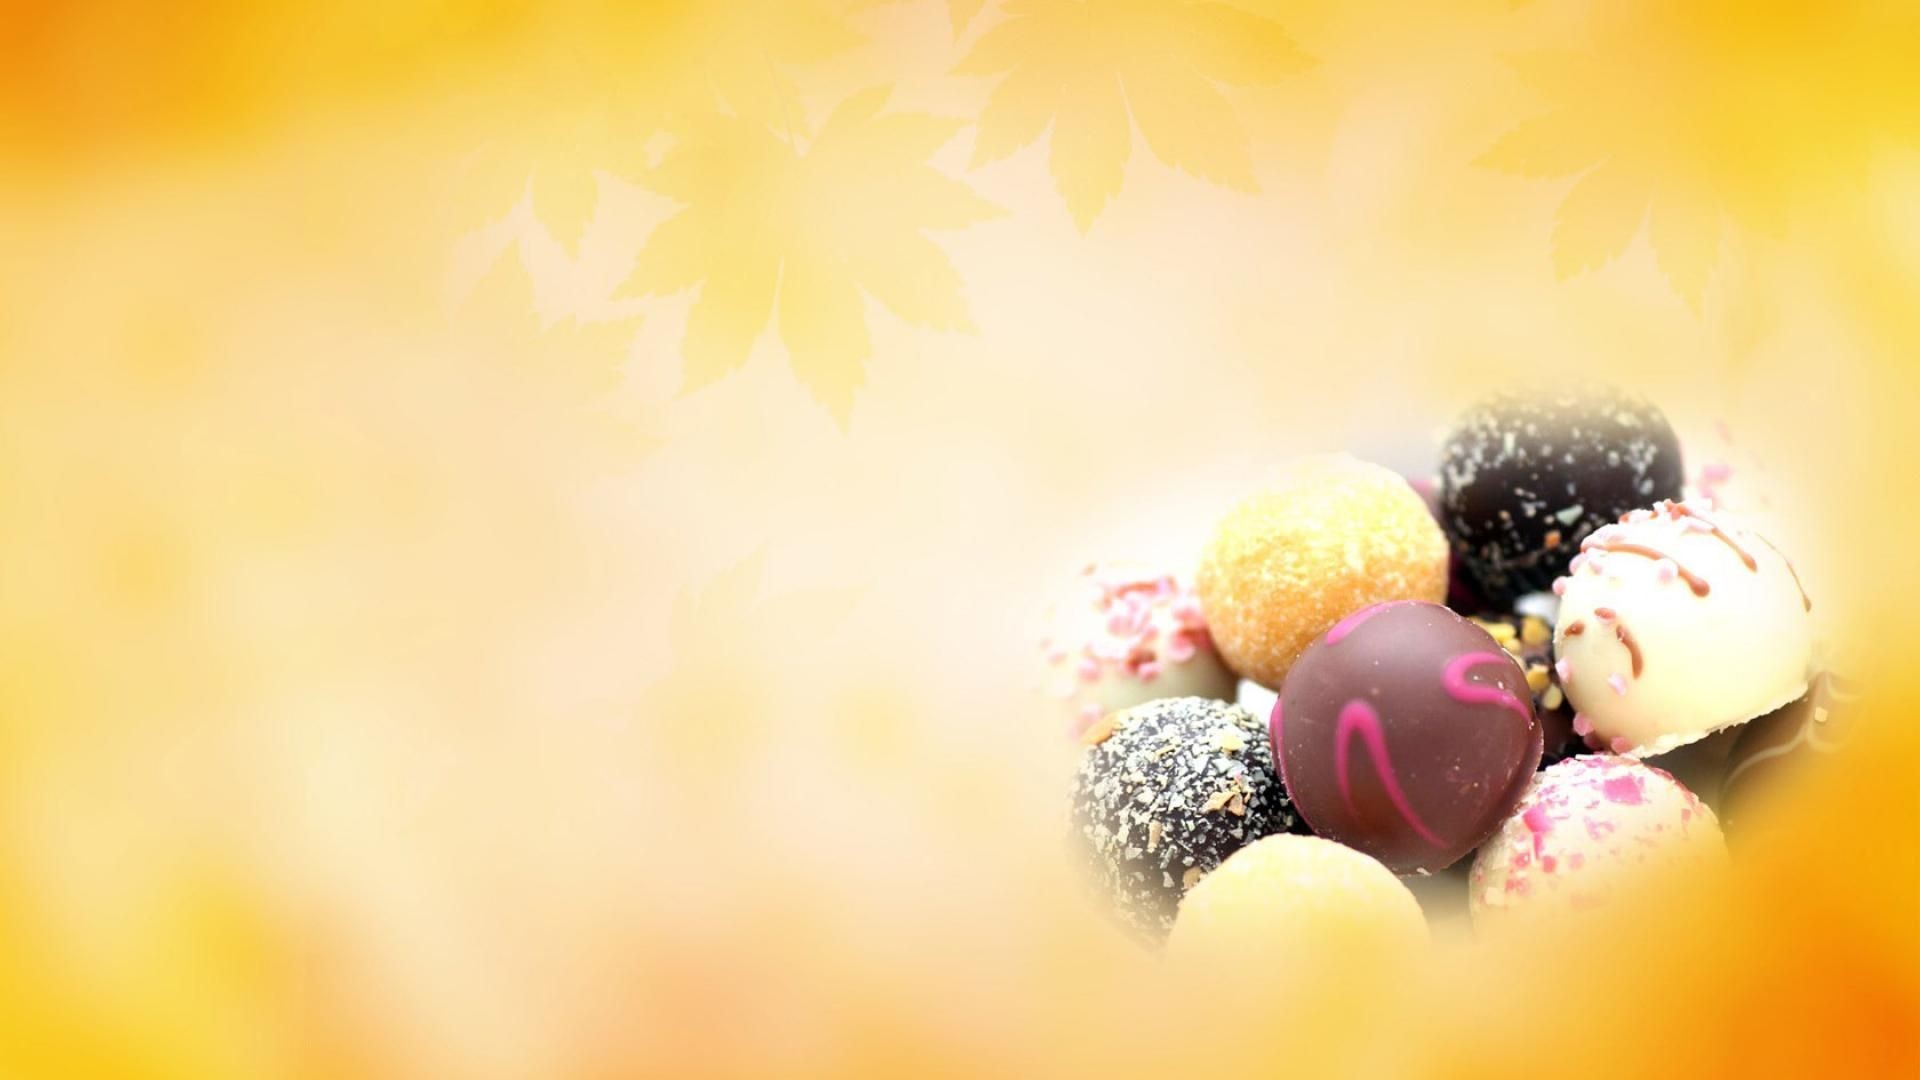 Ice Cream Background - Here you can explore hq ice cream background